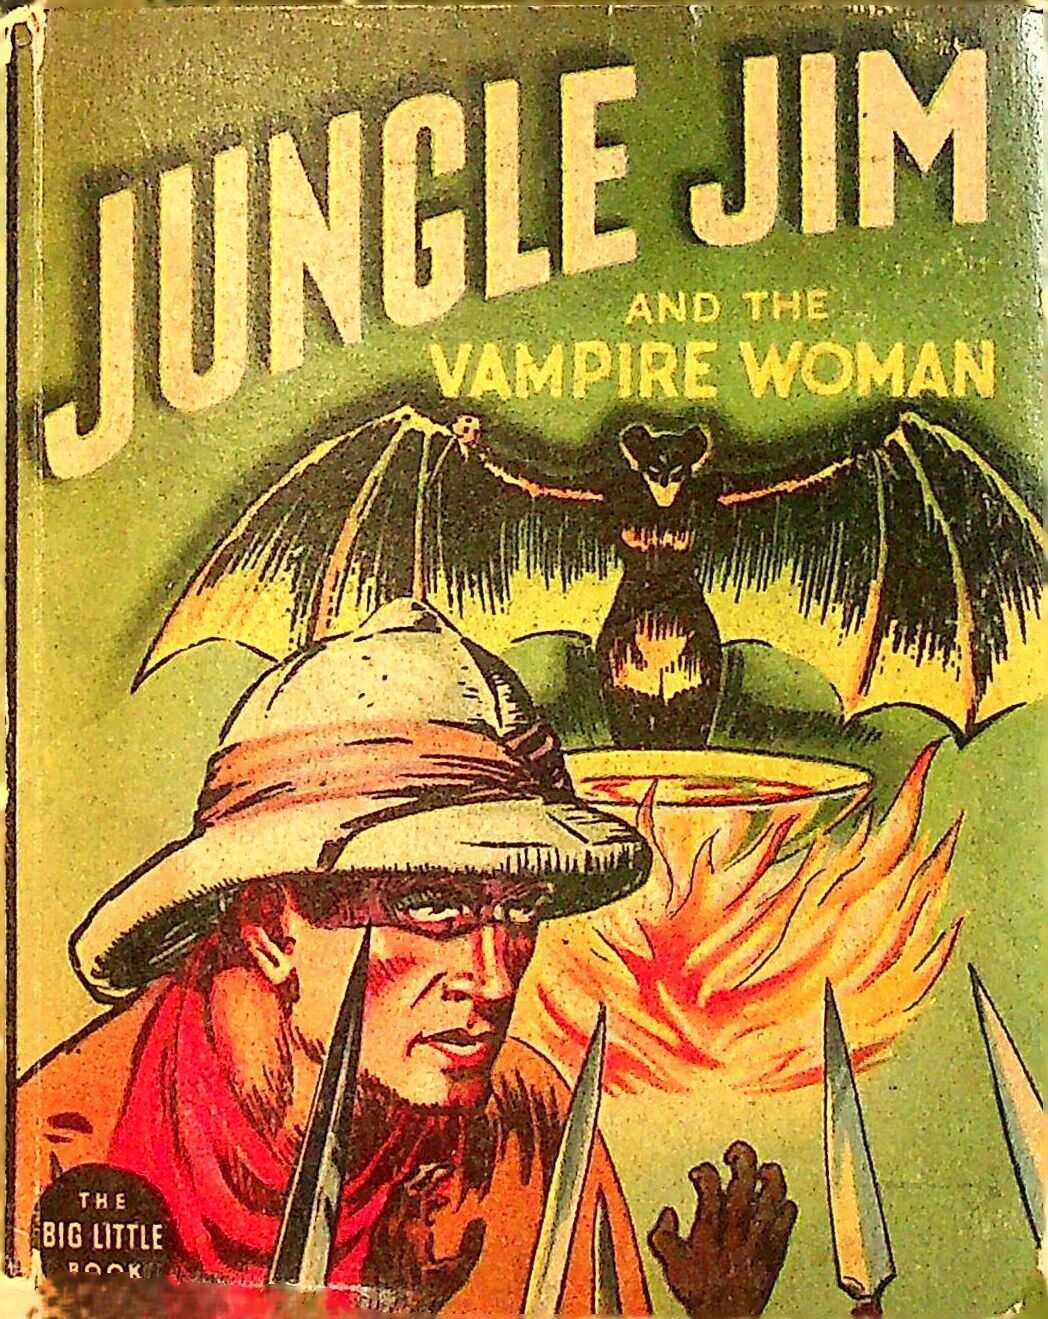 Jungle Jim and the Vampire Woman #1139 GD 1937